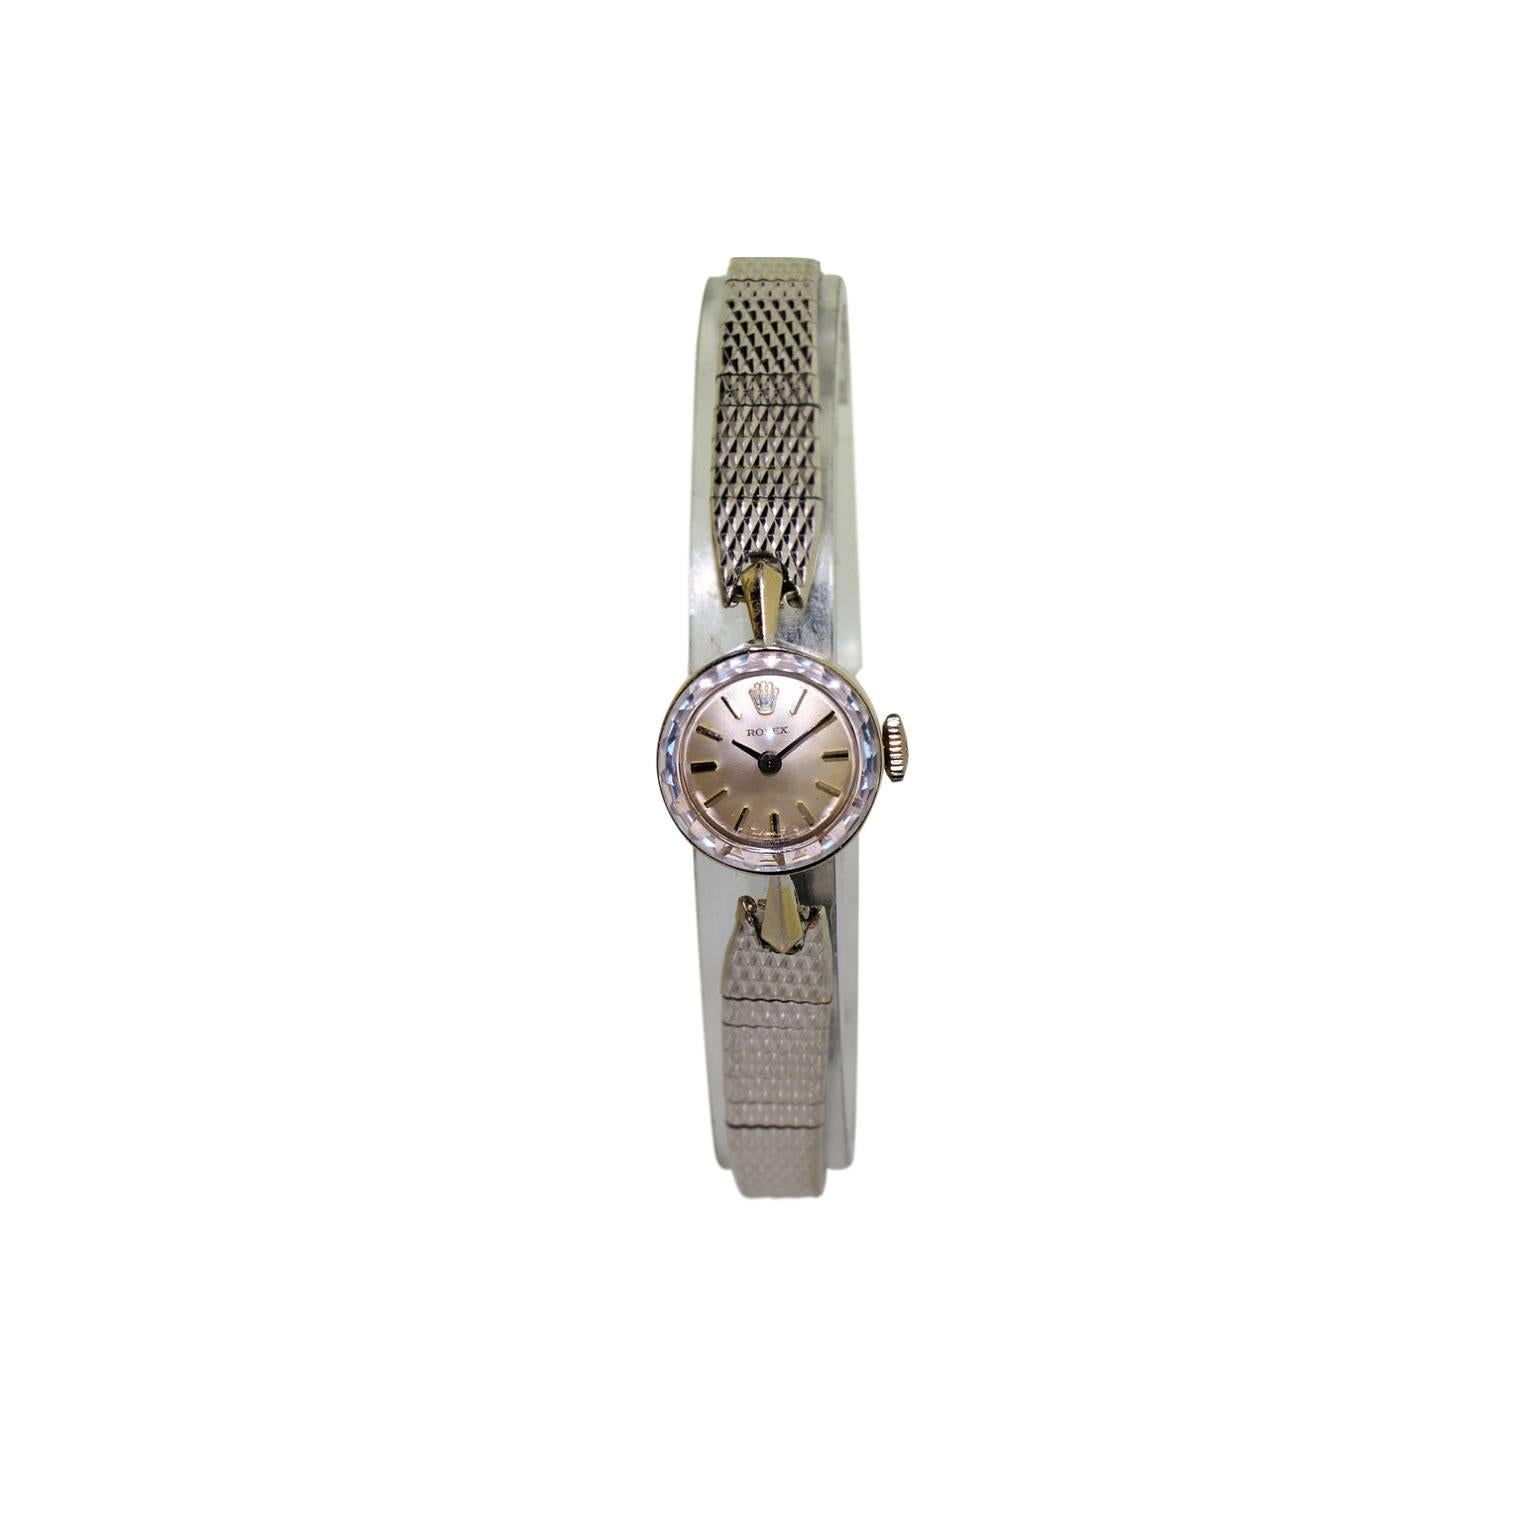 FACTORY / HOUSE: Rolex Watch Company
STYLE / REFERENCE: Ladies Evening Watch
METAL / MATERIAL: 14Kt. Solid White Gold / White Gold Filled Period Bracelet
CIRCA: 1960's
DIMENSIONS: 26mm X 14mm
MOVEMENT / CALIBER: Manual Winding / 17 Jewels / Cal.